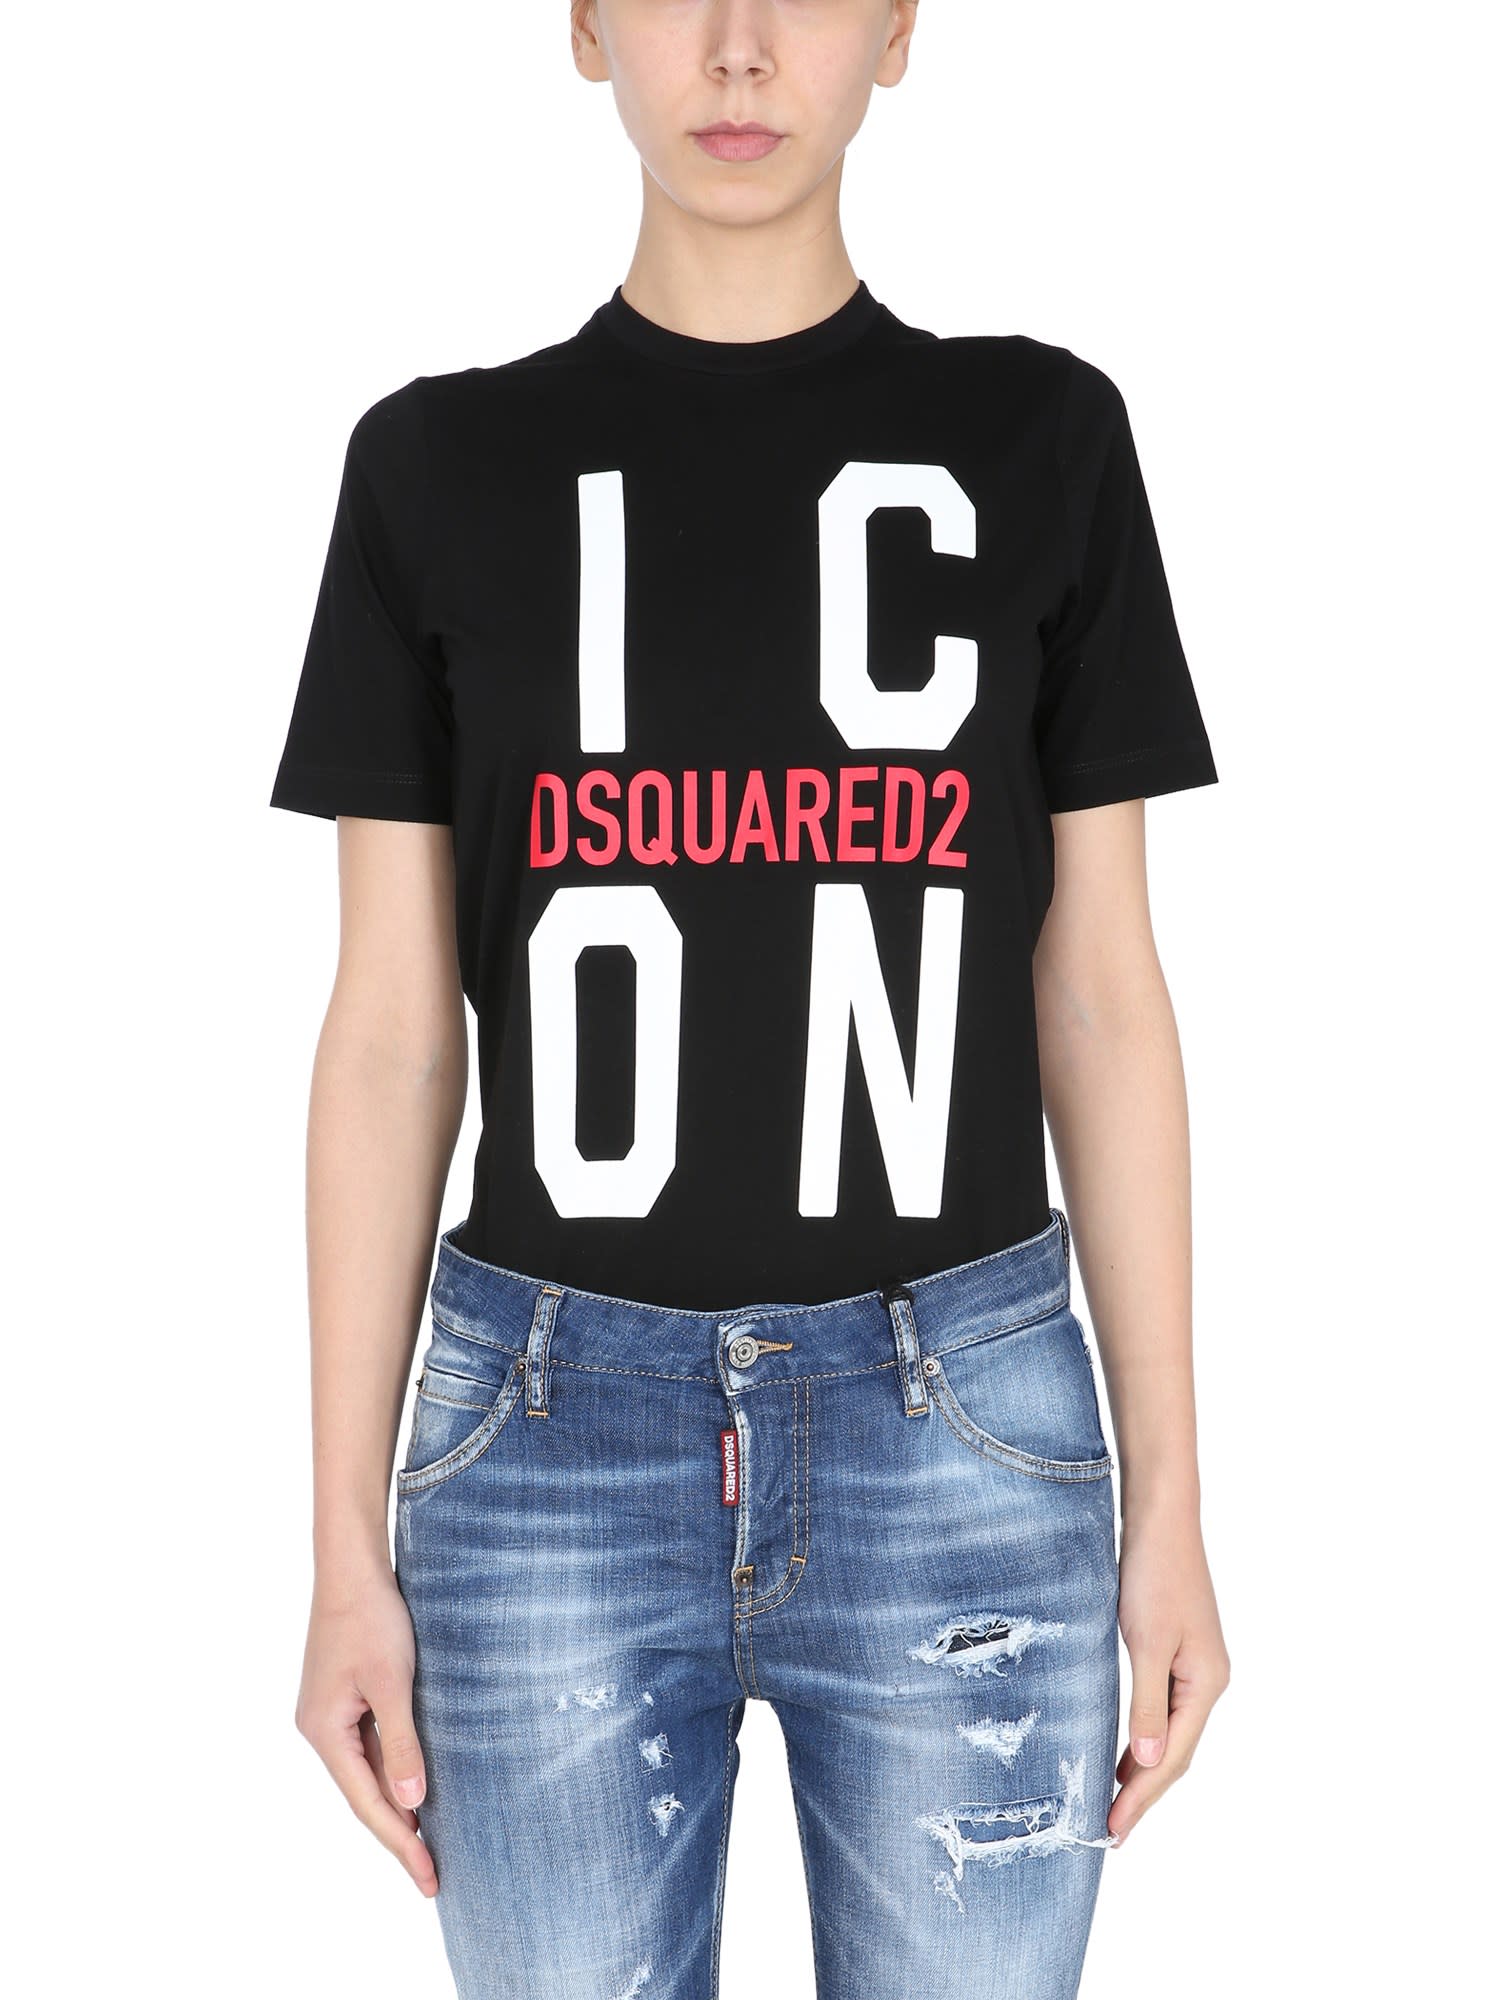 DSQUARED2 ICON T-SHIRT,S80GC0024 S23009900